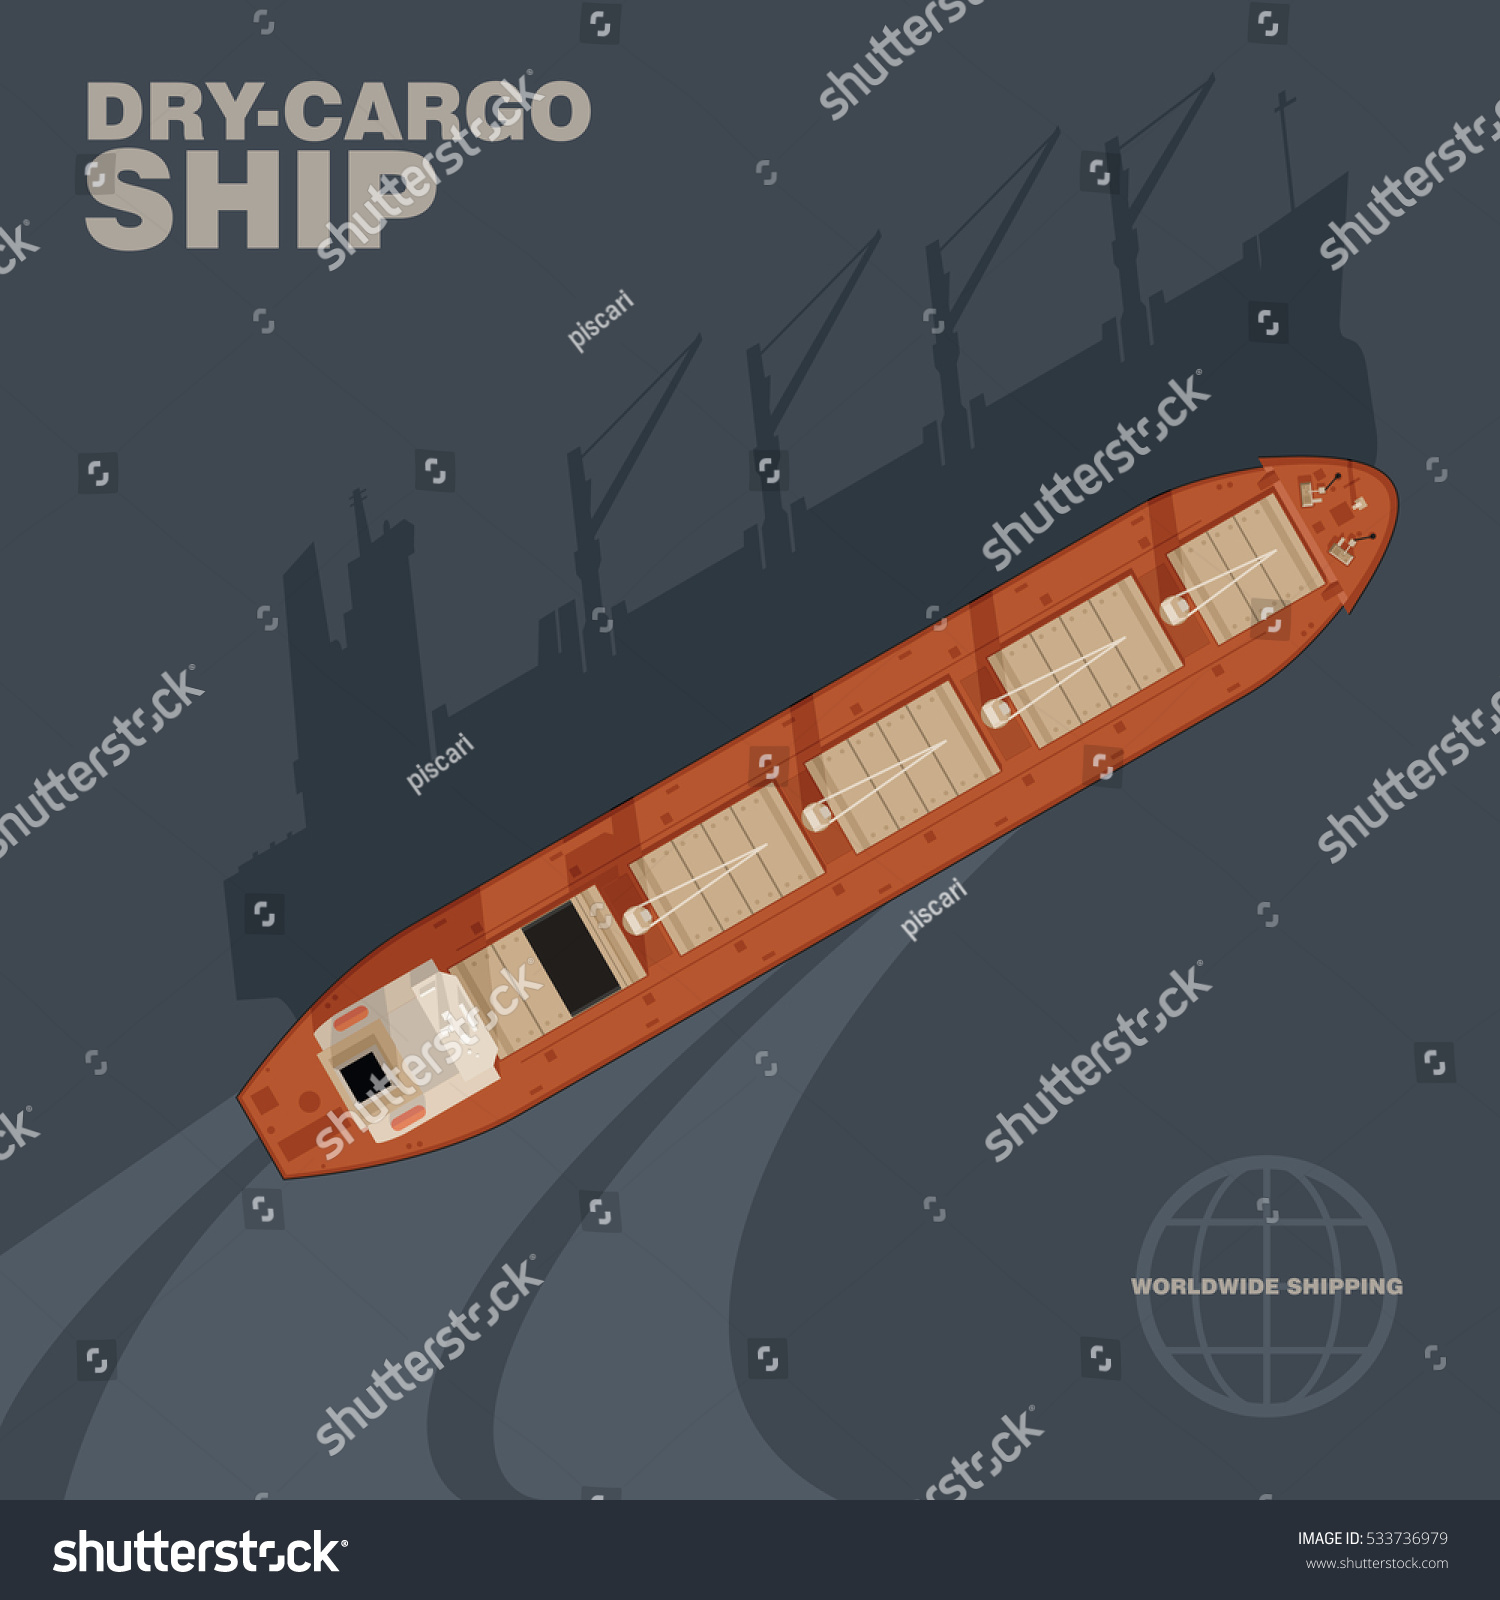 SVG of Aerial view of dry-cargo ship in the sea with cast shadow silhouette. Top view of a deck of a bulk carrier, commercial freight transport worldwide, realistic style, vector illustration. svg